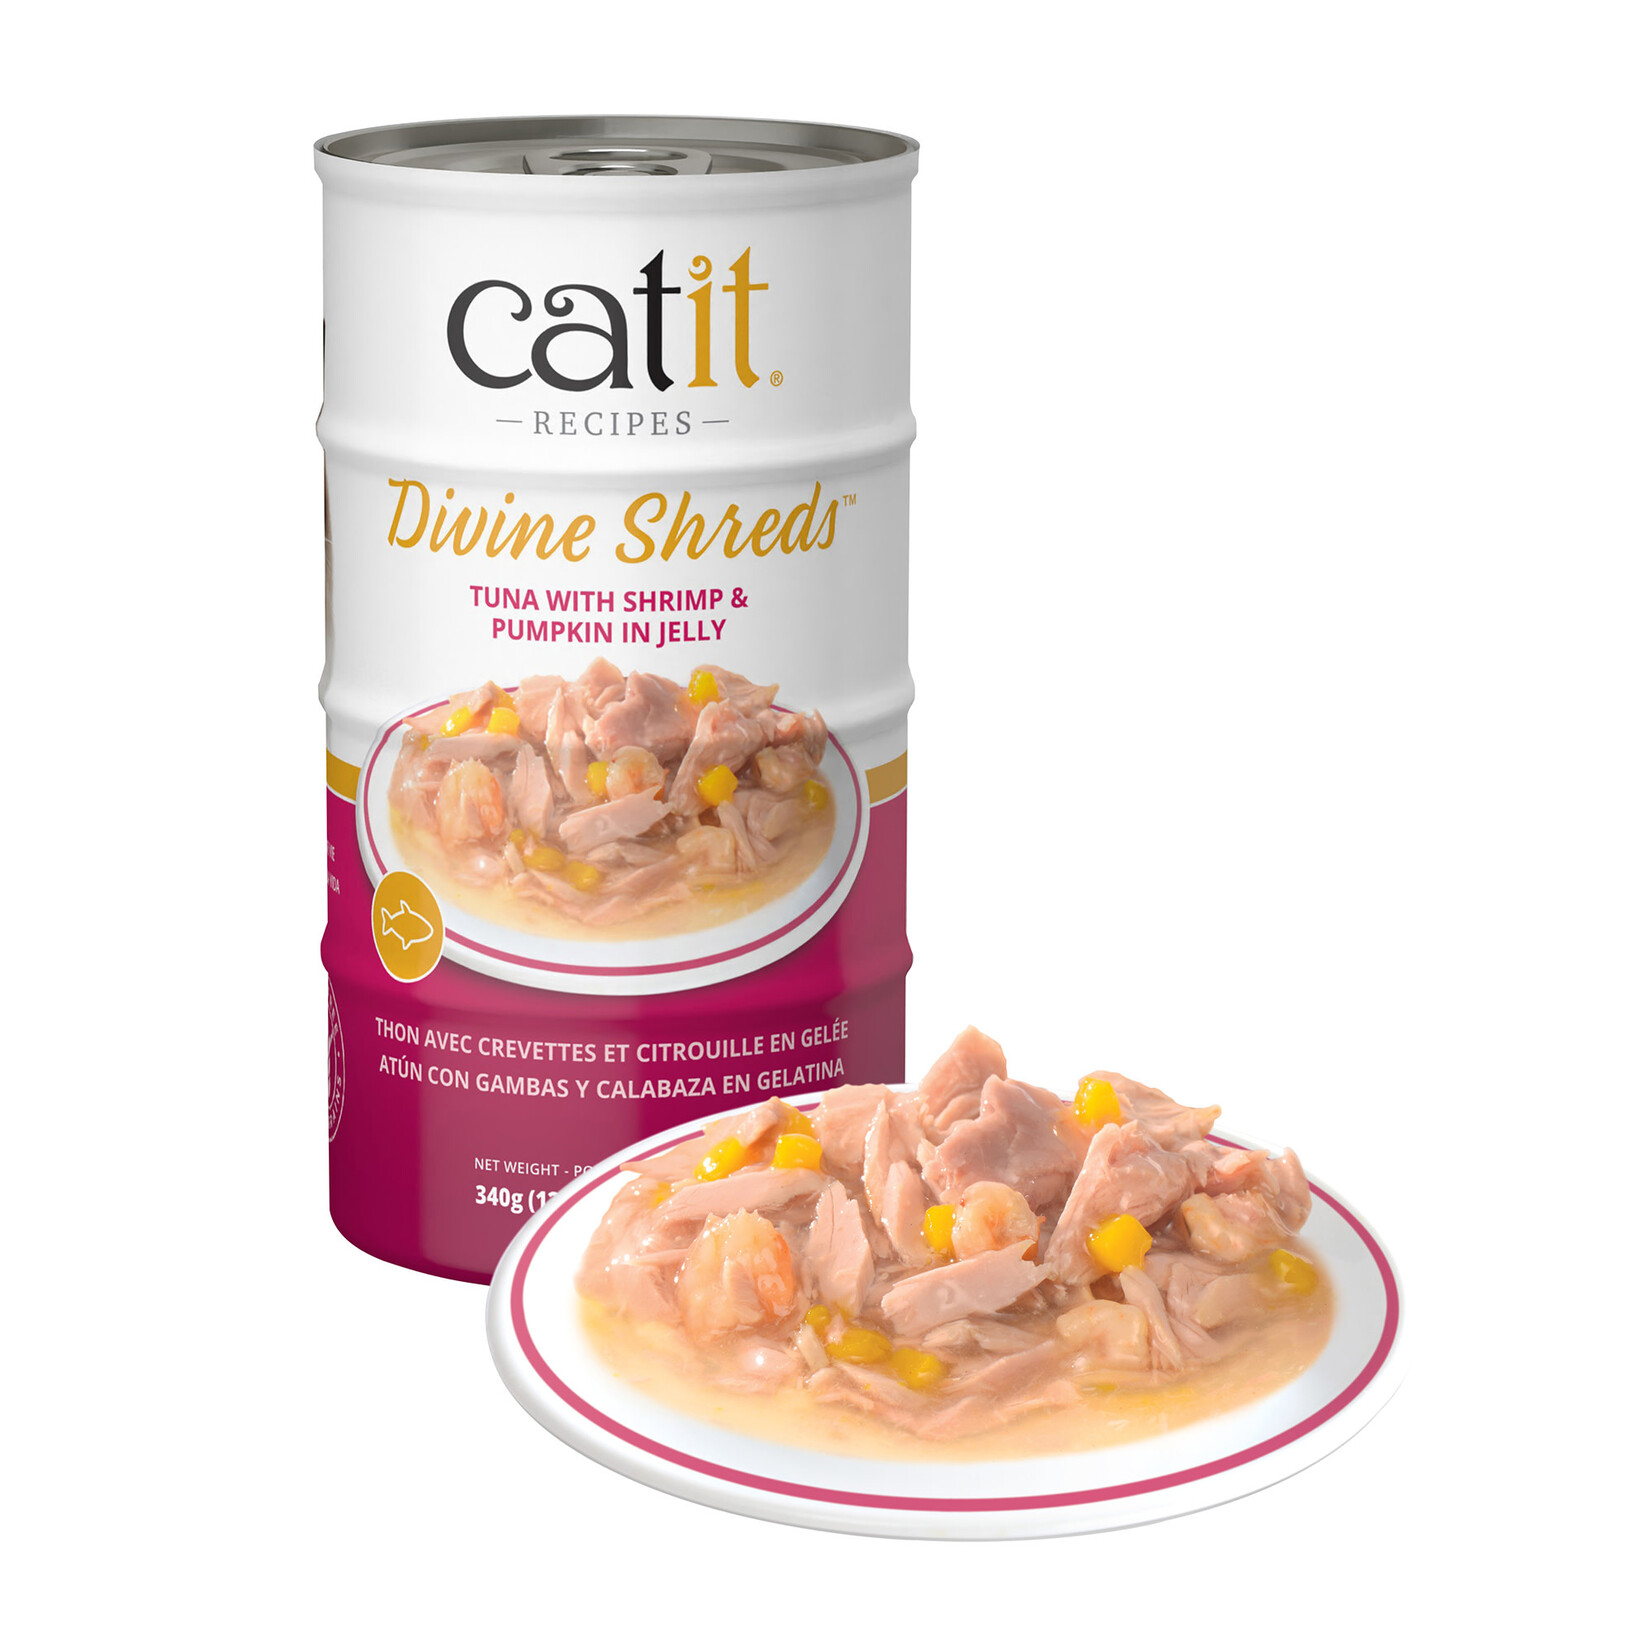 CAT IT Catit Divine Shreds - Tuna with Shrimp & Pumpkin in Jelly - 4 x 85 g Cans